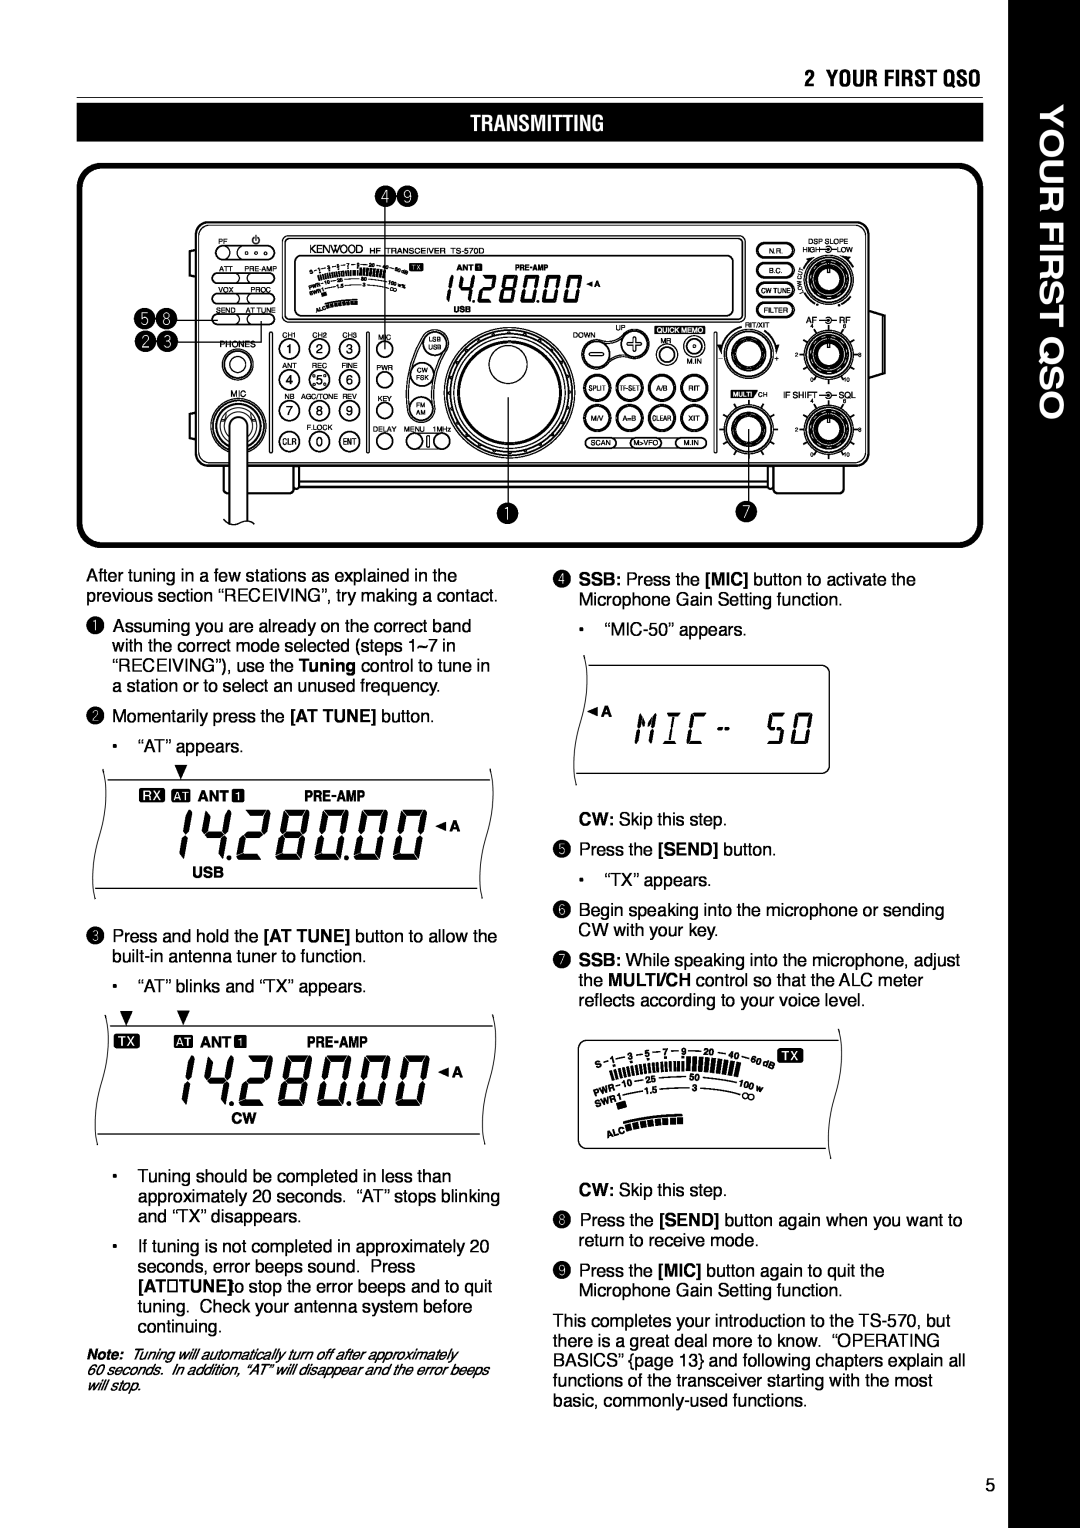 Kenwood TS-570D instruction manual Transmitting, Your First Qso 